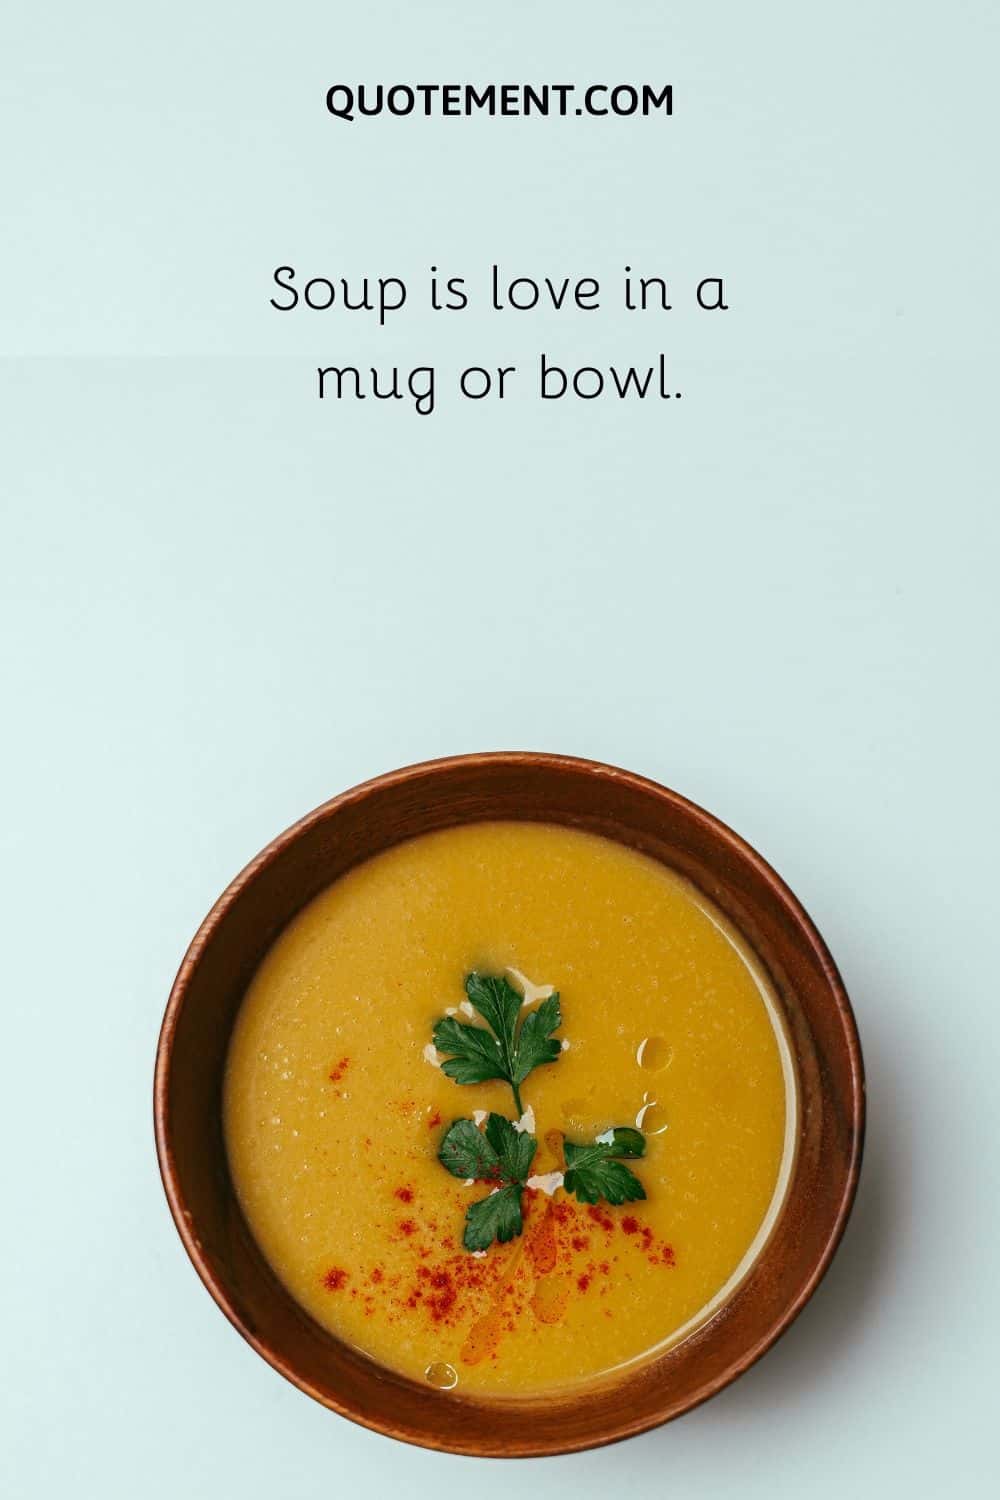 Soup is love in a mug or bowl